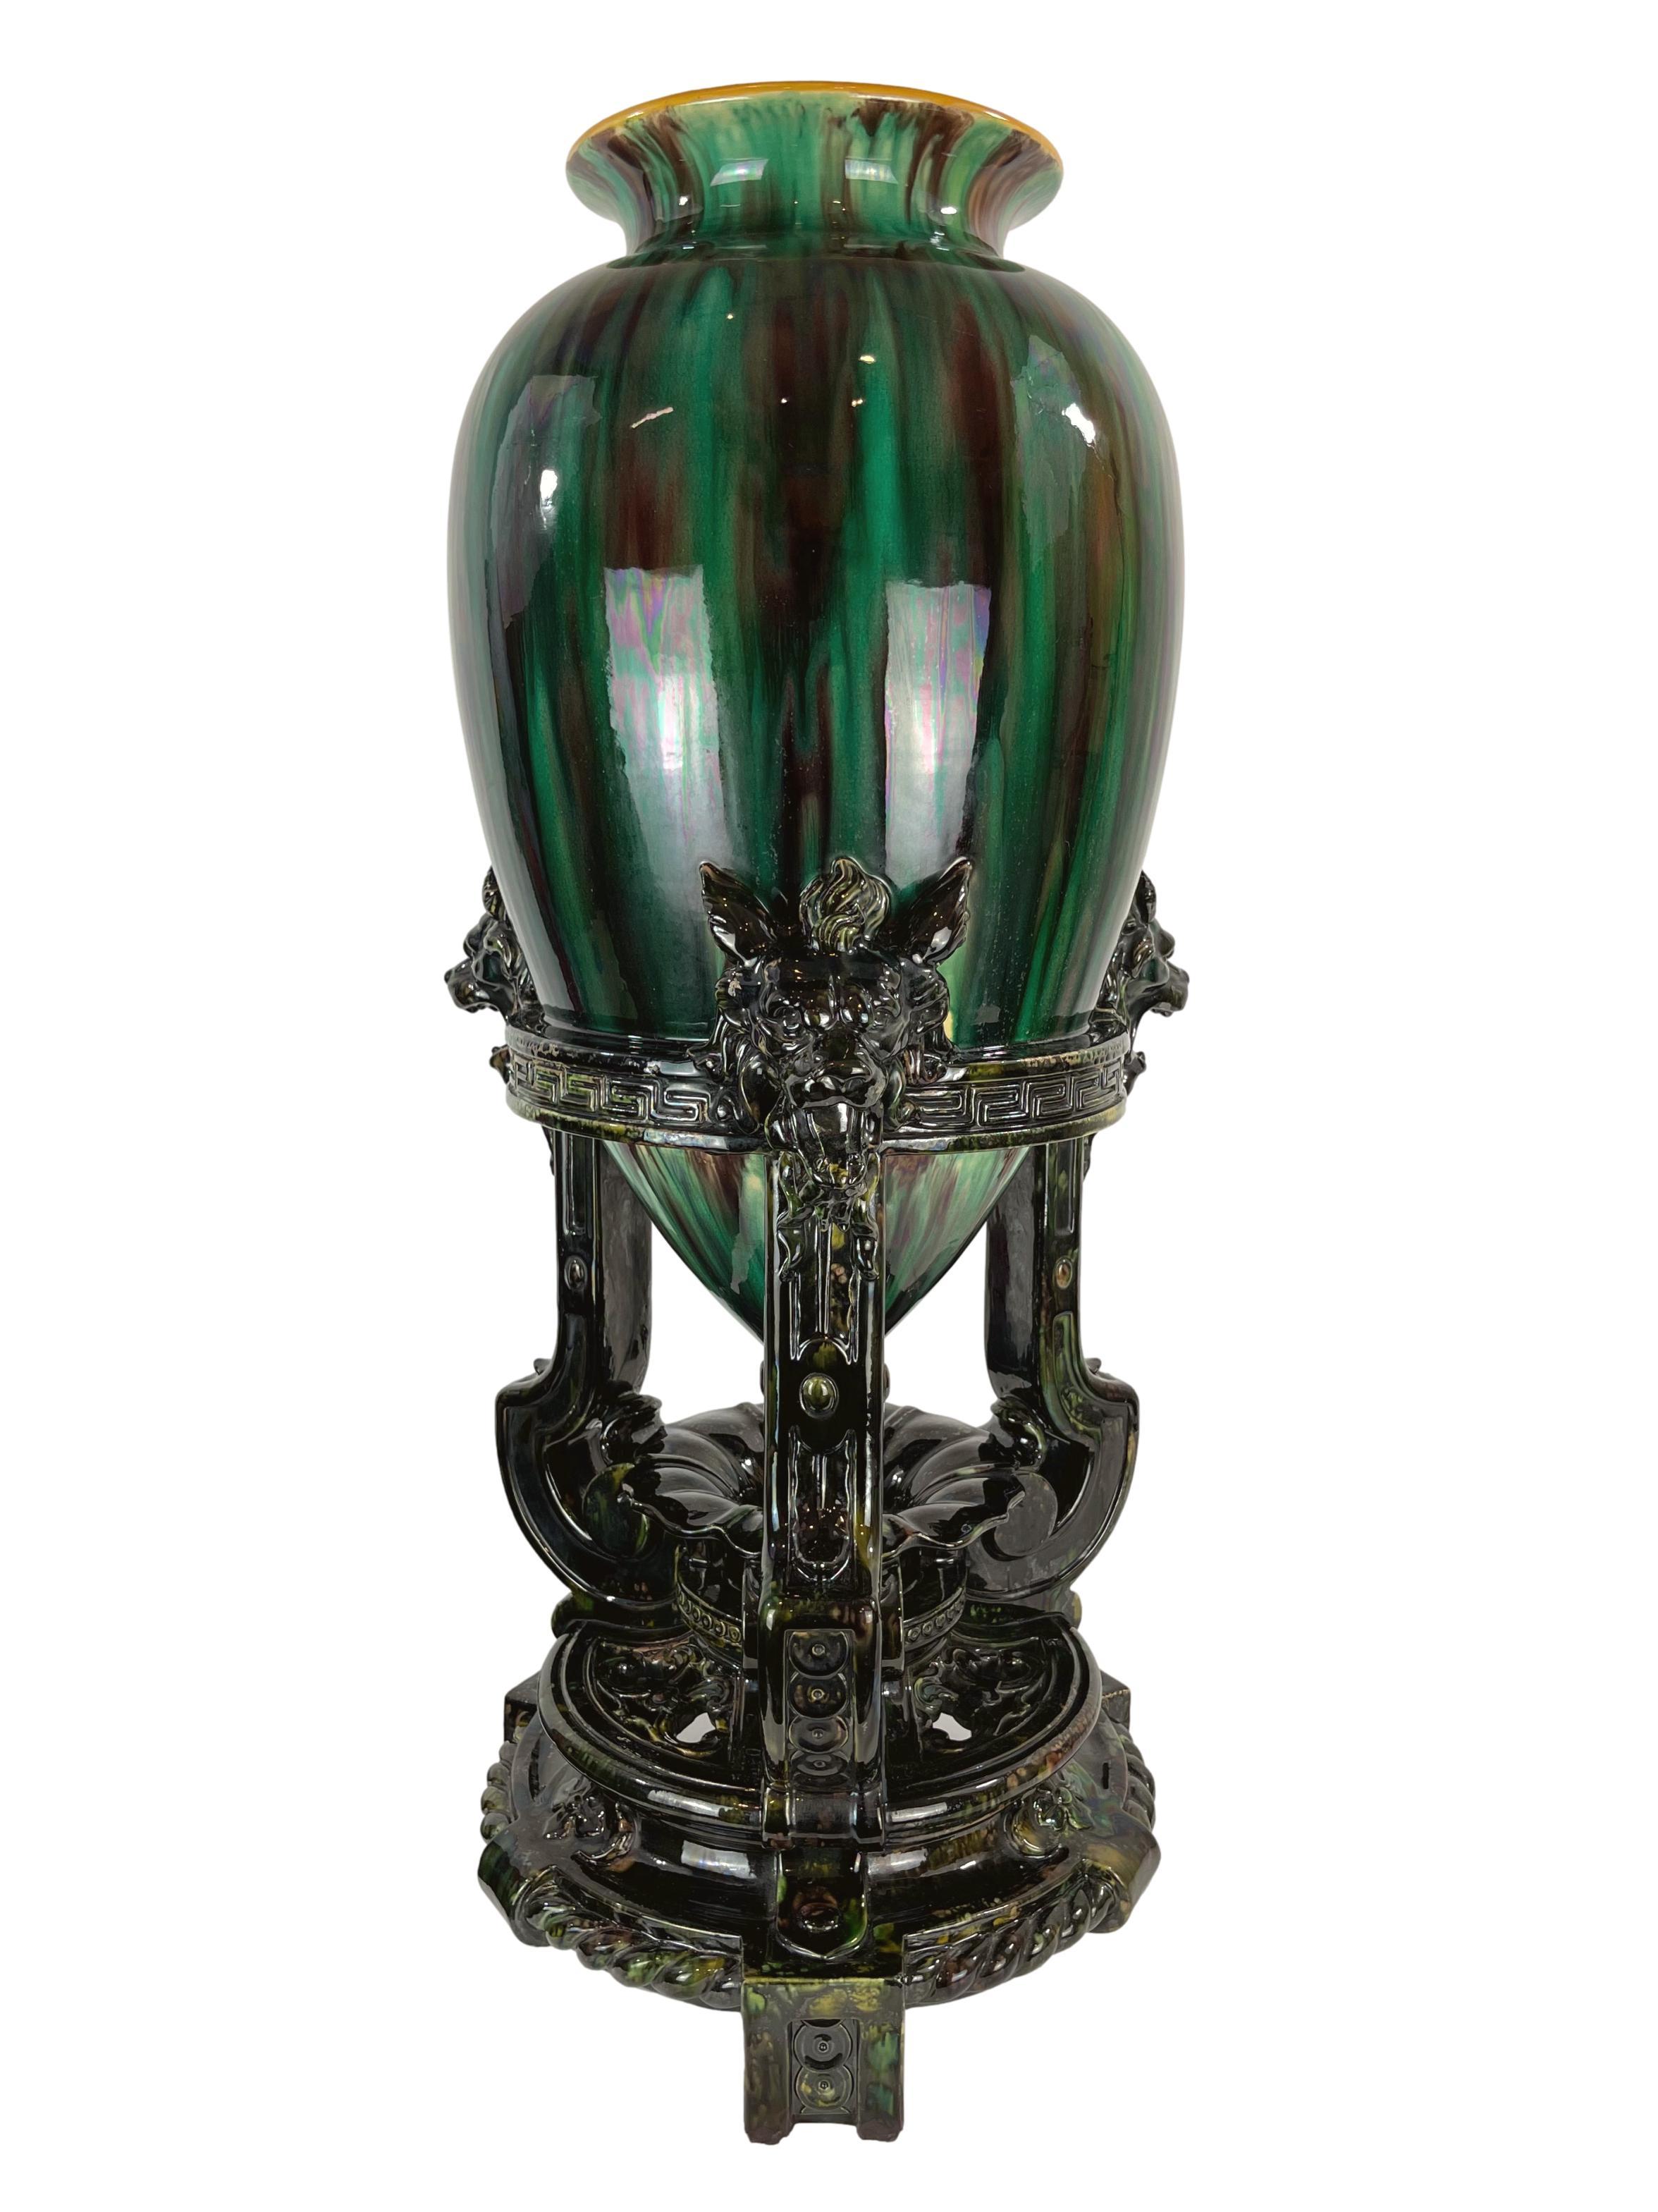 Monumental Minton Majolica Floor Vase, molded as a large Chinese bottle vase glazed in mottled green, brown, and black, banded in yellow, the interior glazed in pink, supported by an integral black glazed tripod base with three fierce beasts-head